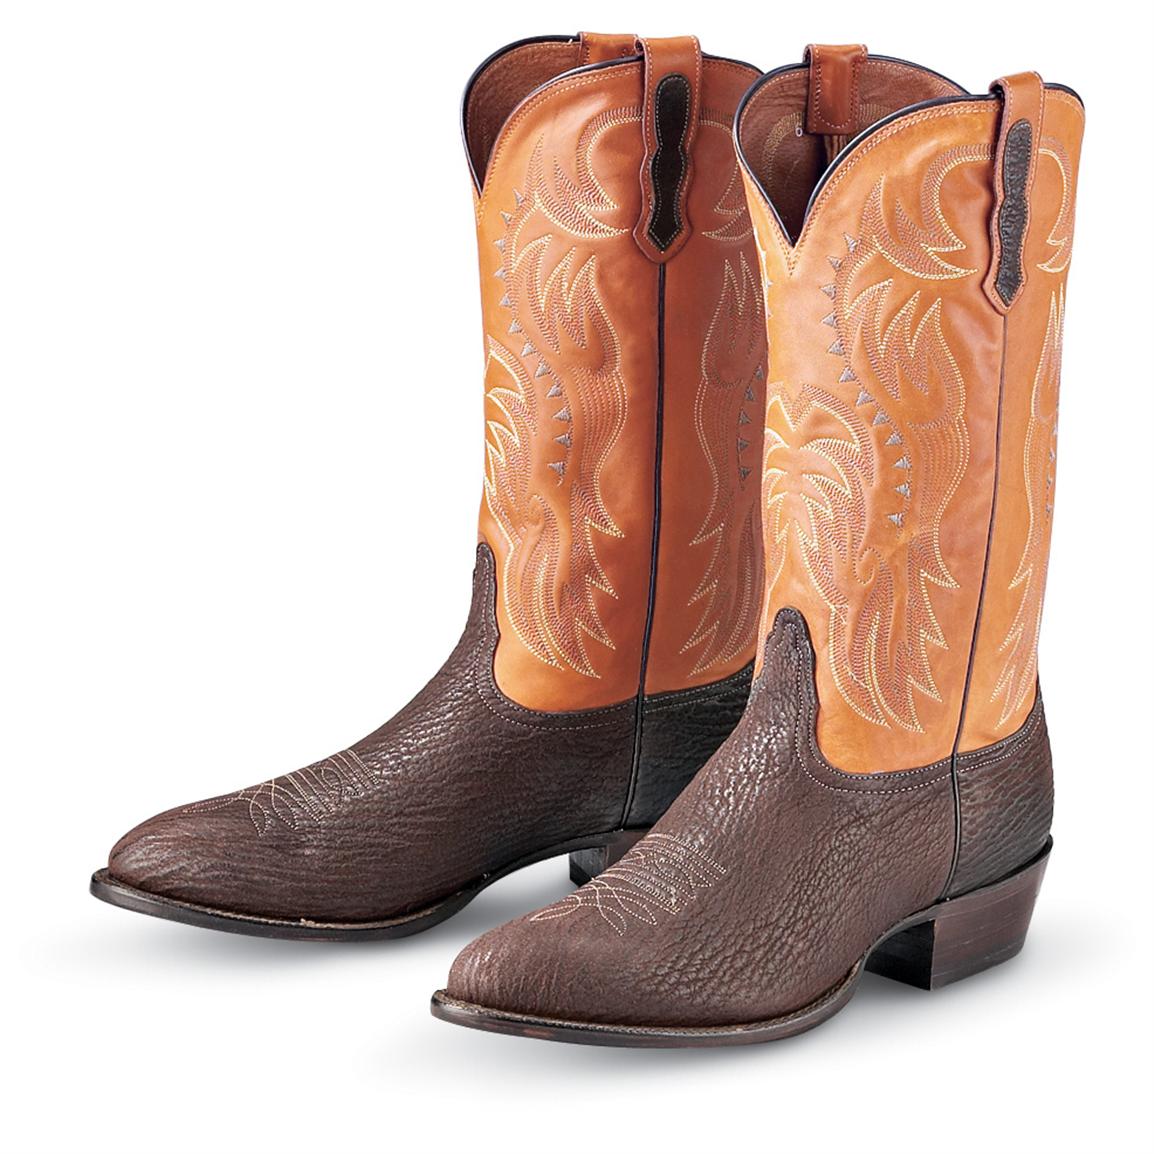 Men's Nocona® Glove - tanned Shark Boots, Chocolate / Tobacco Brown ...